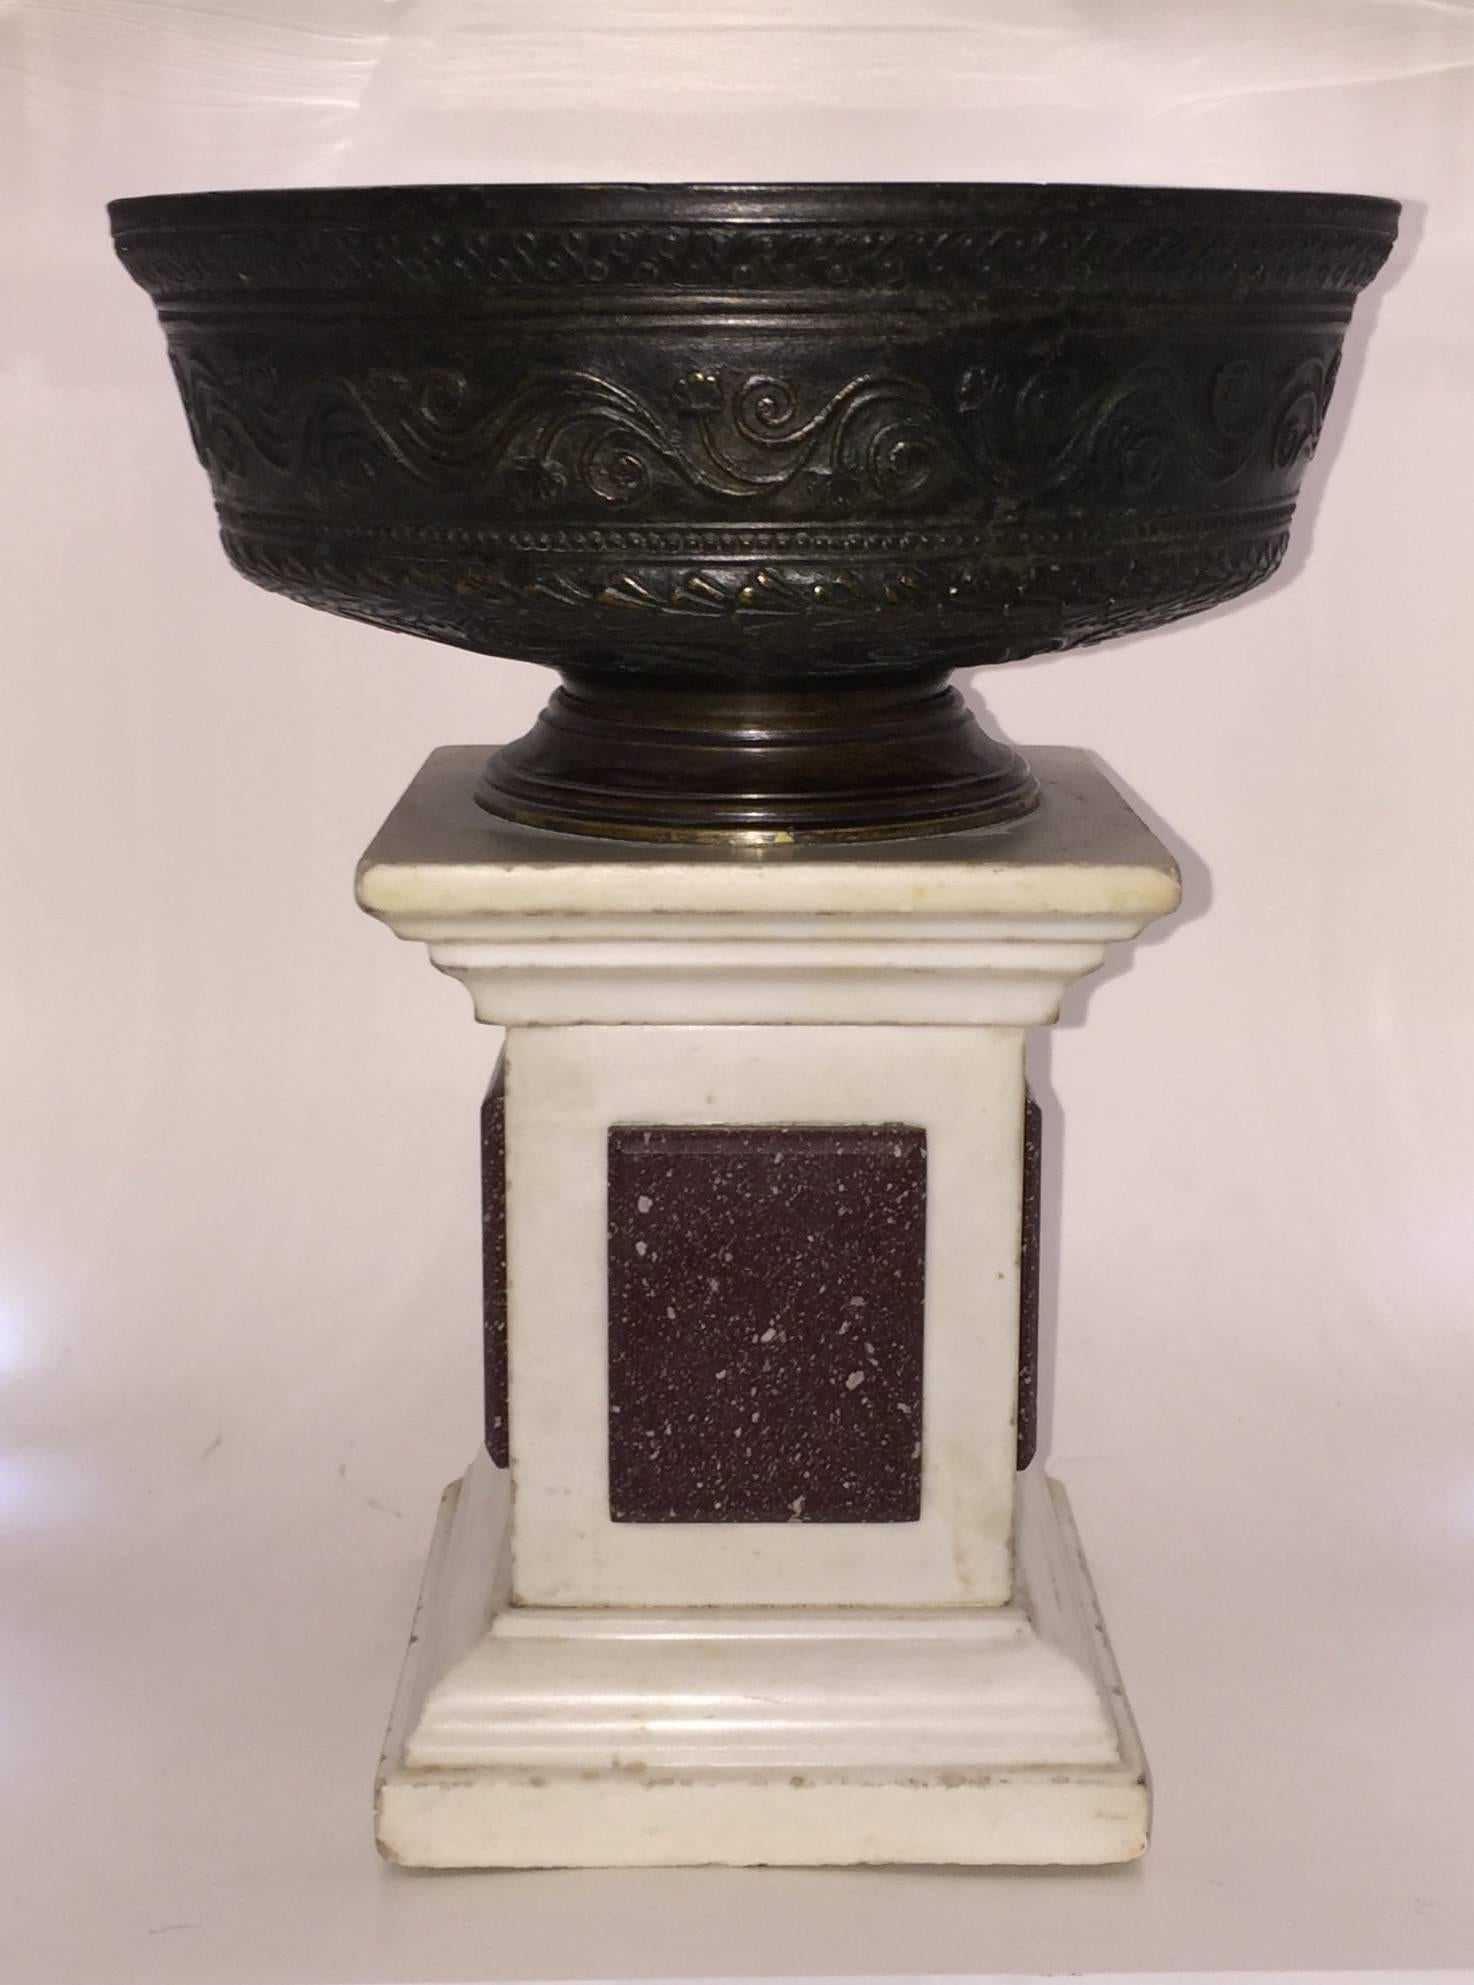 The bowl highly decorated, atop a white marble and porphyry base.